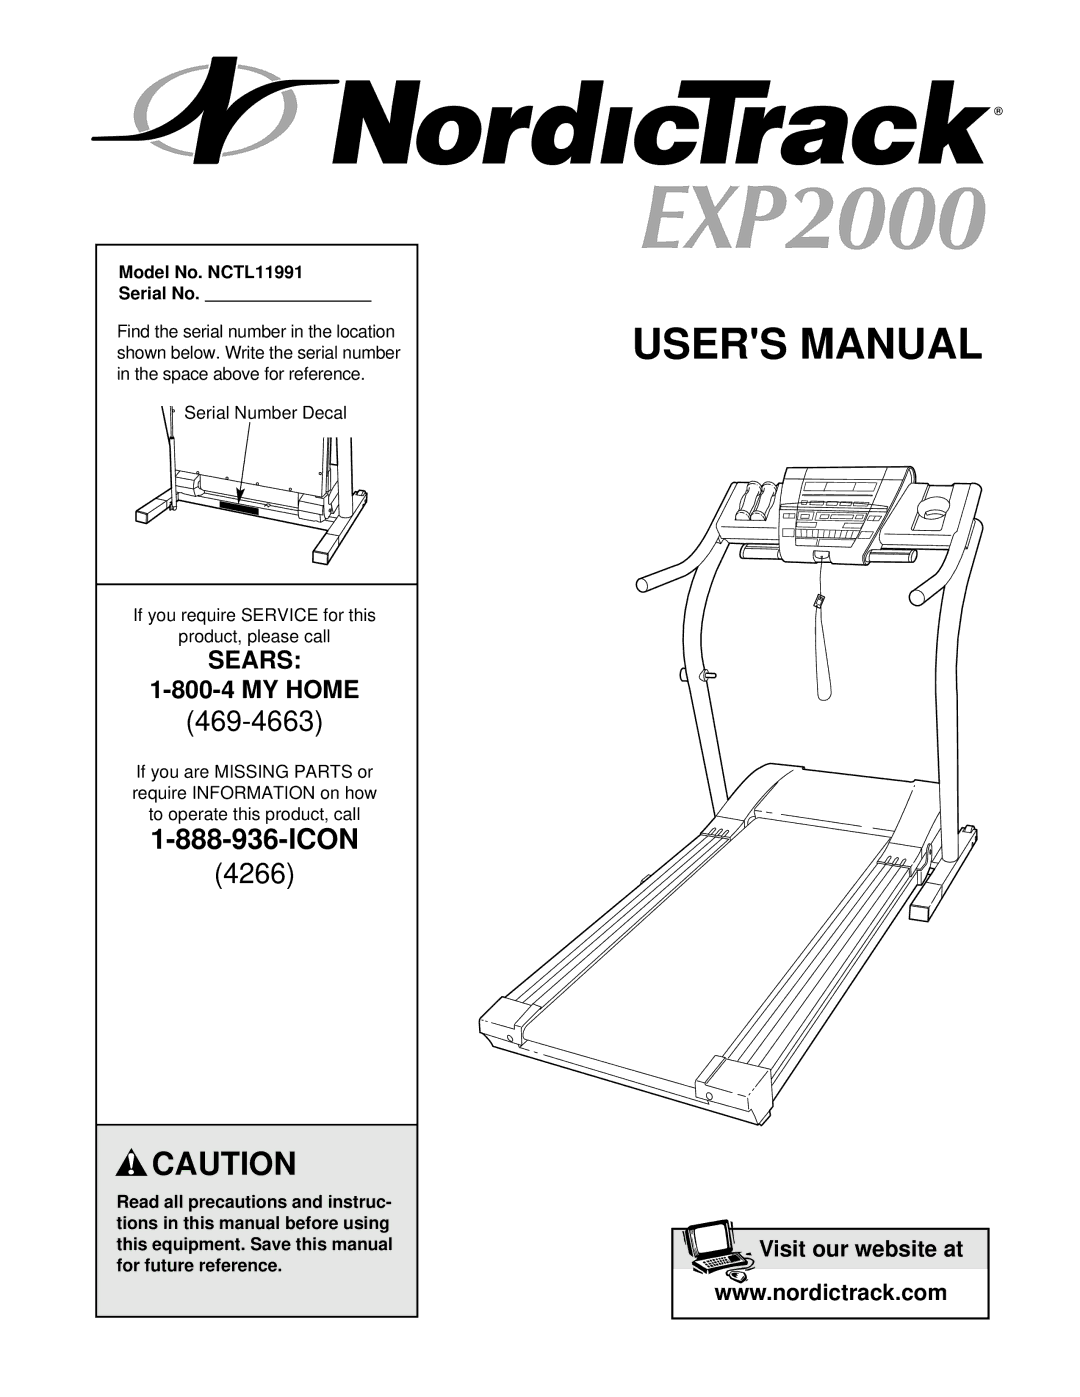 NordicTrack user manual Model No. NCTL11991 Serial No, Serial Number Decal, To operate this product, call 